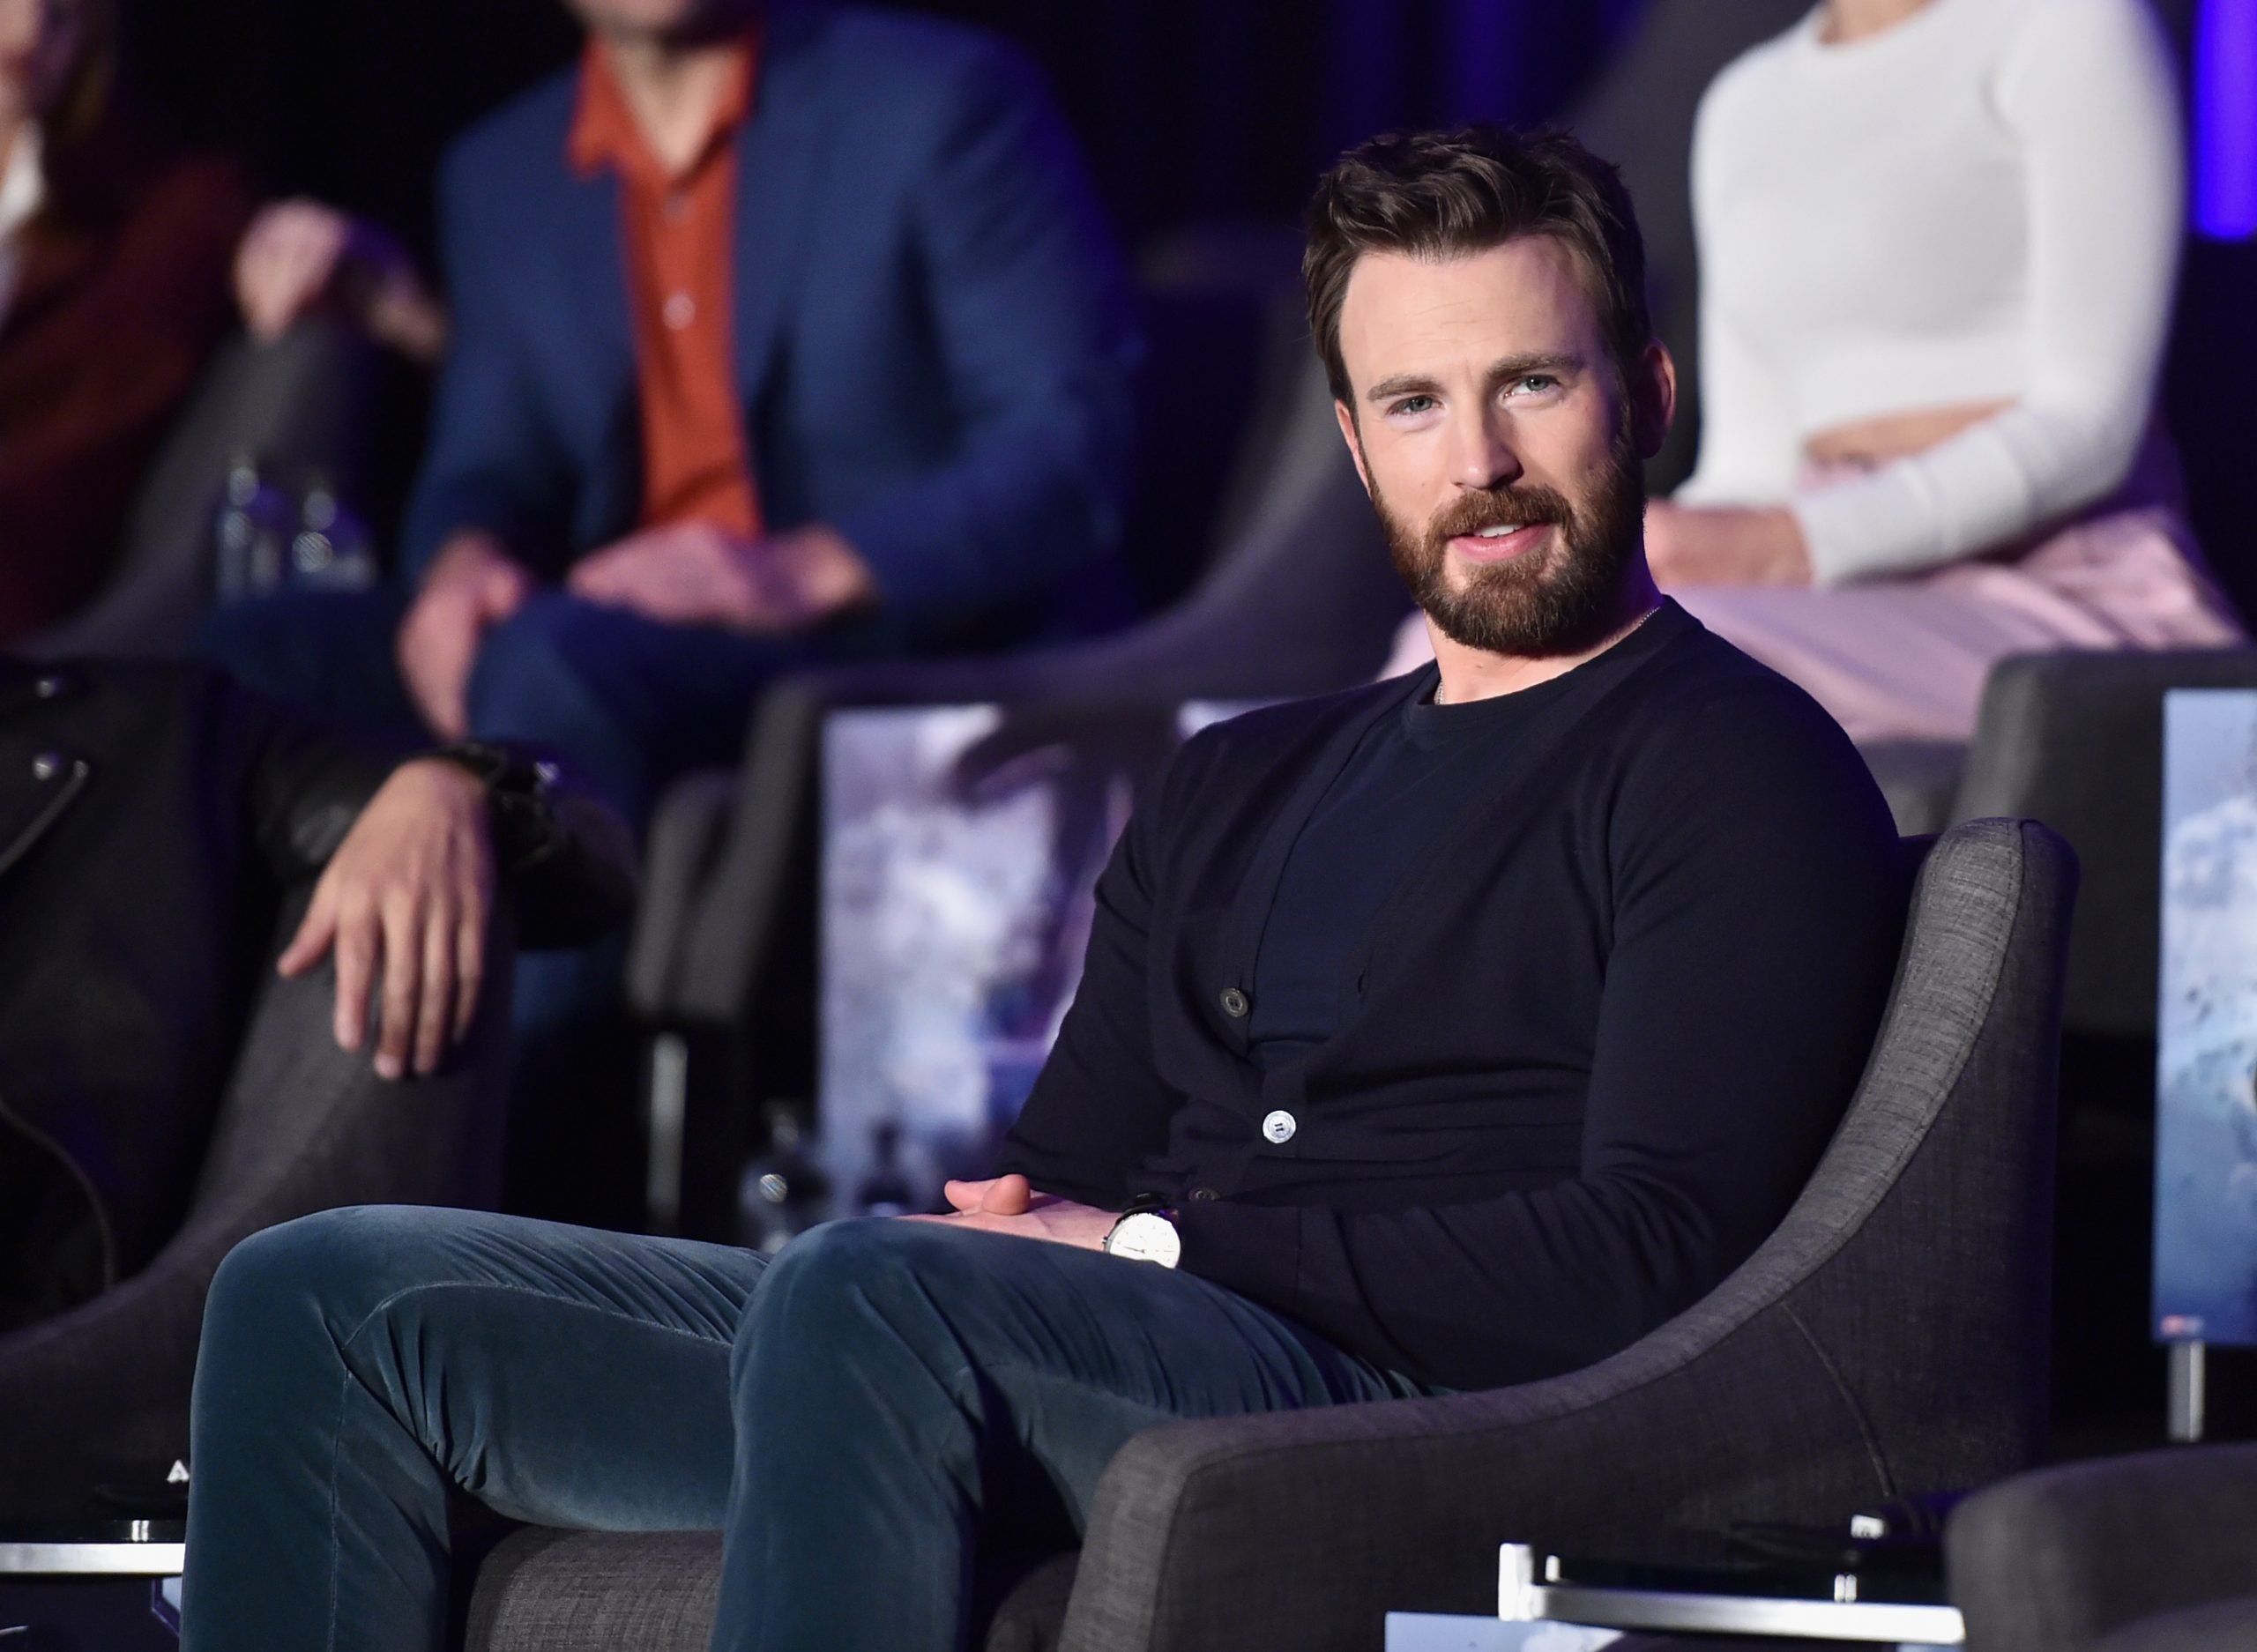 Chris Evans, who played Captain America in the MCU, wears